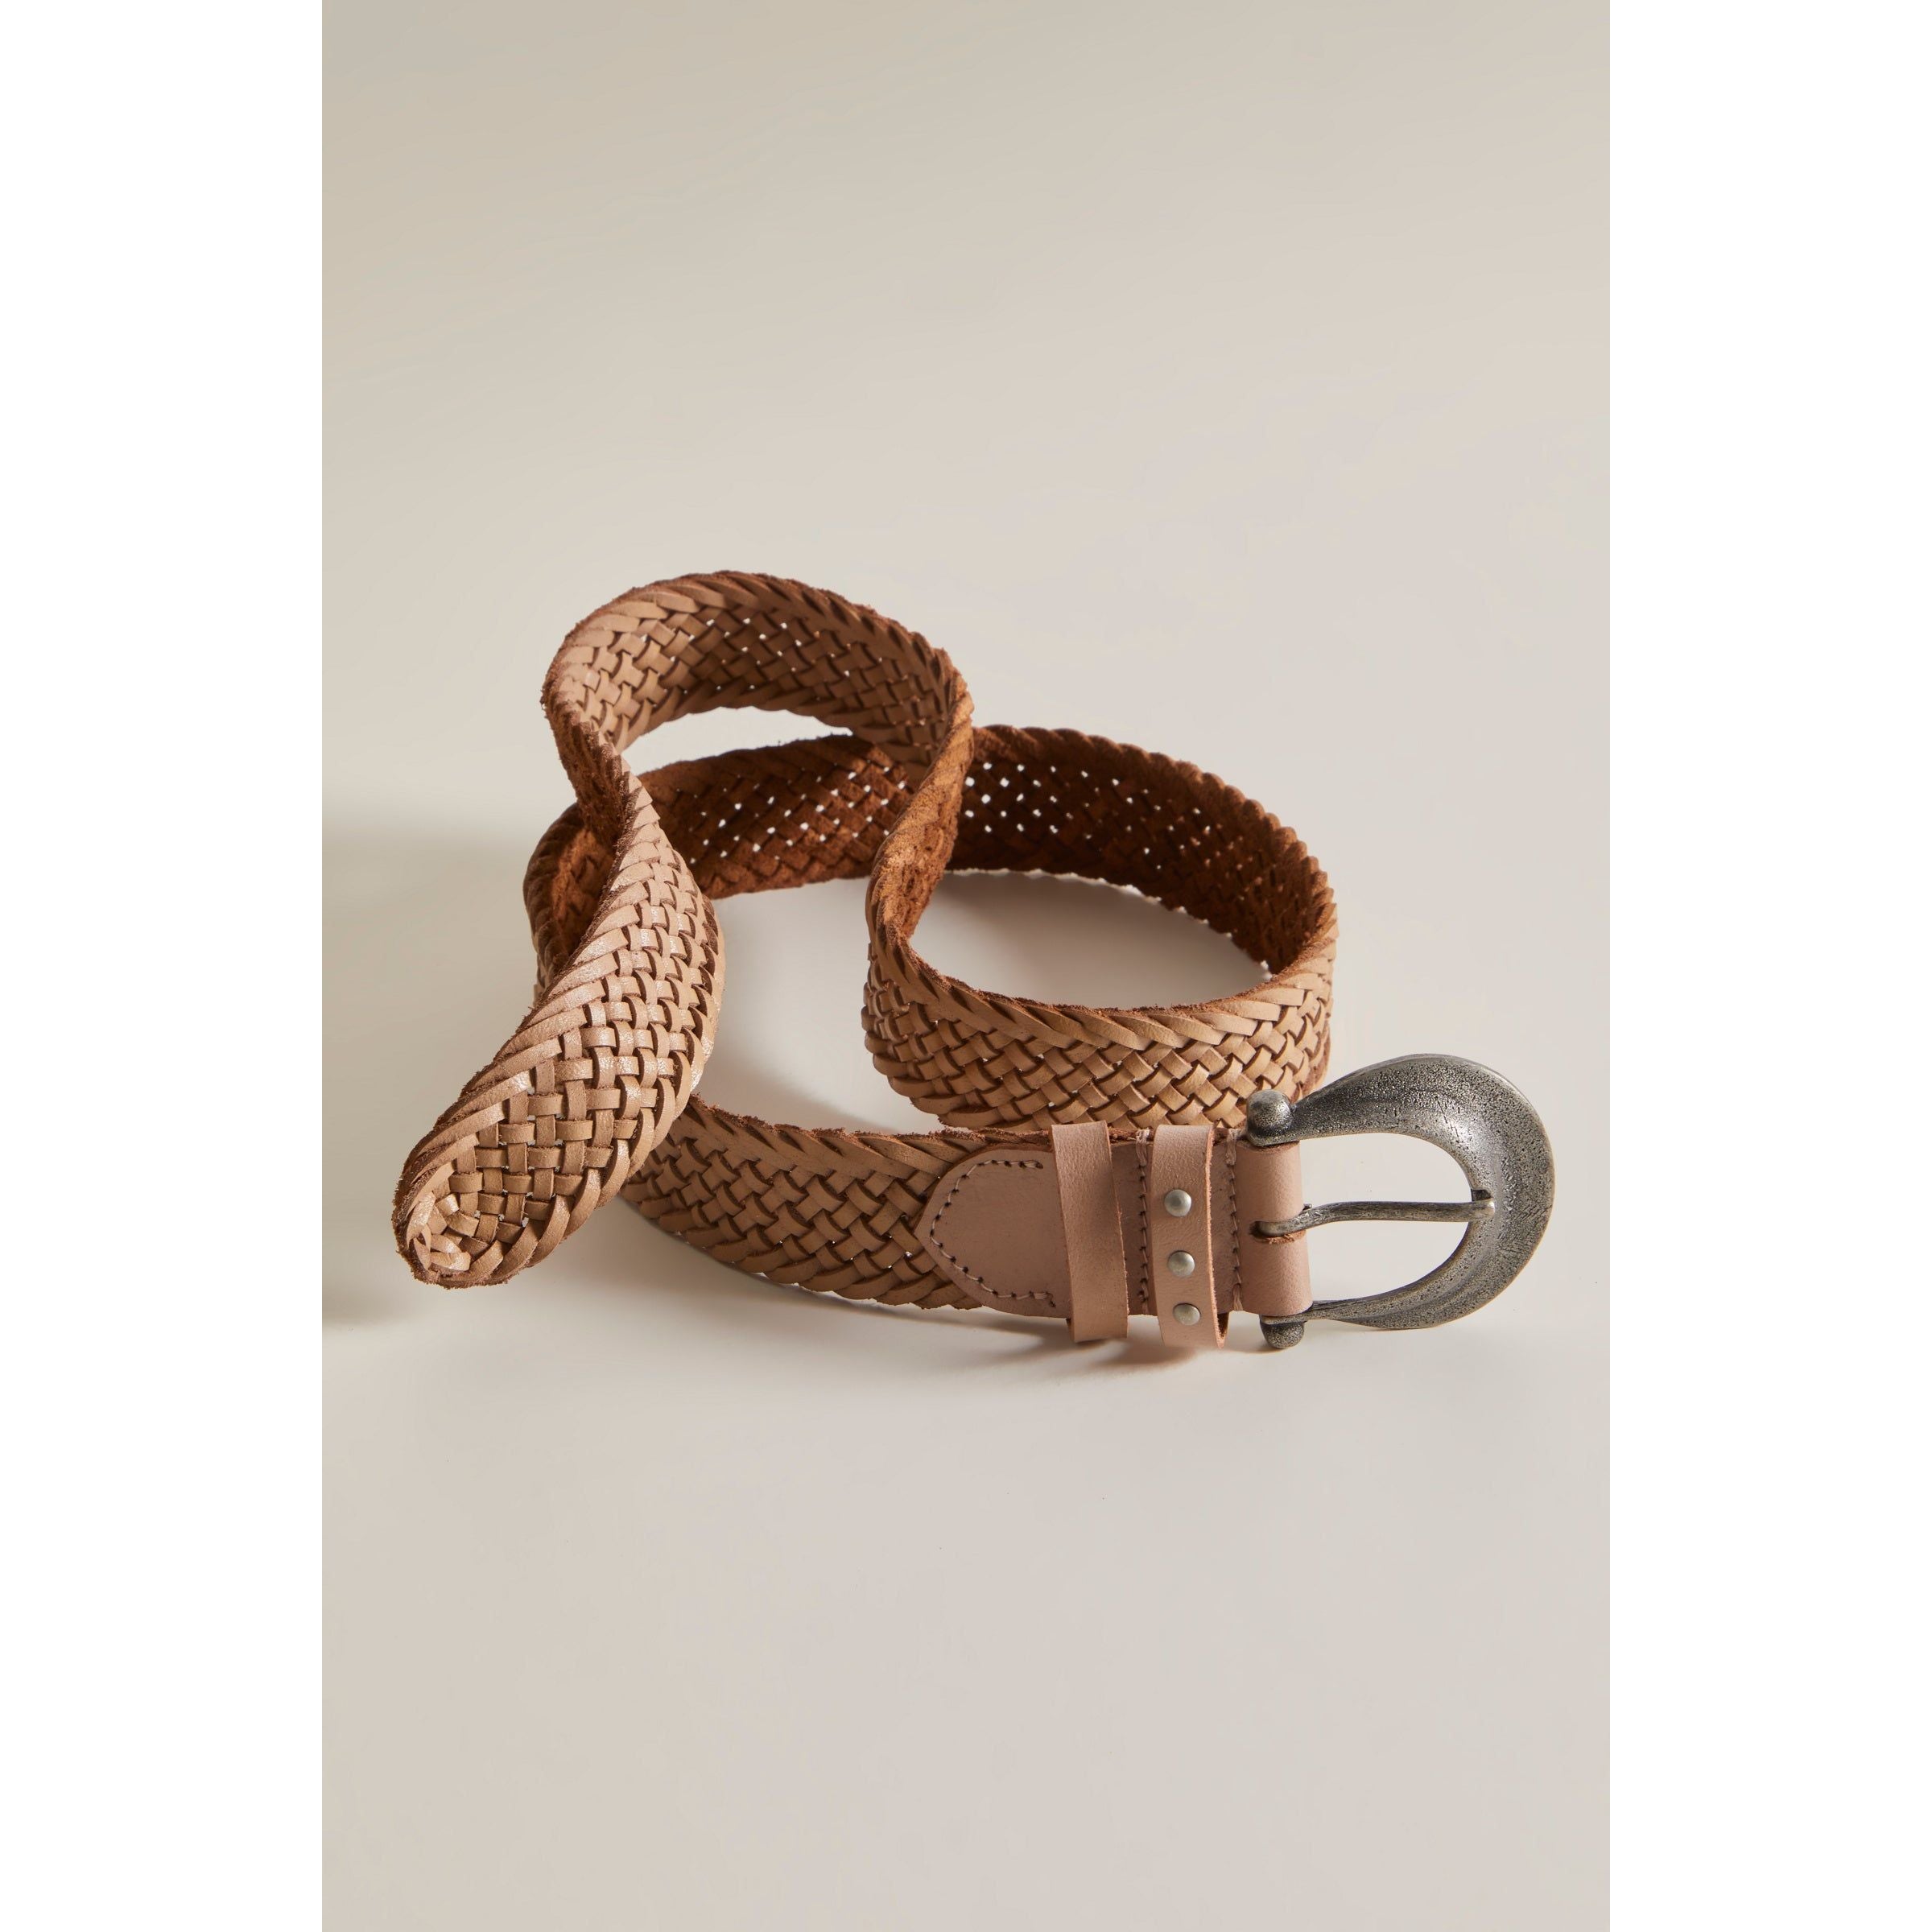 Free People - We The Free Brix Belt in Oyster in Mauve